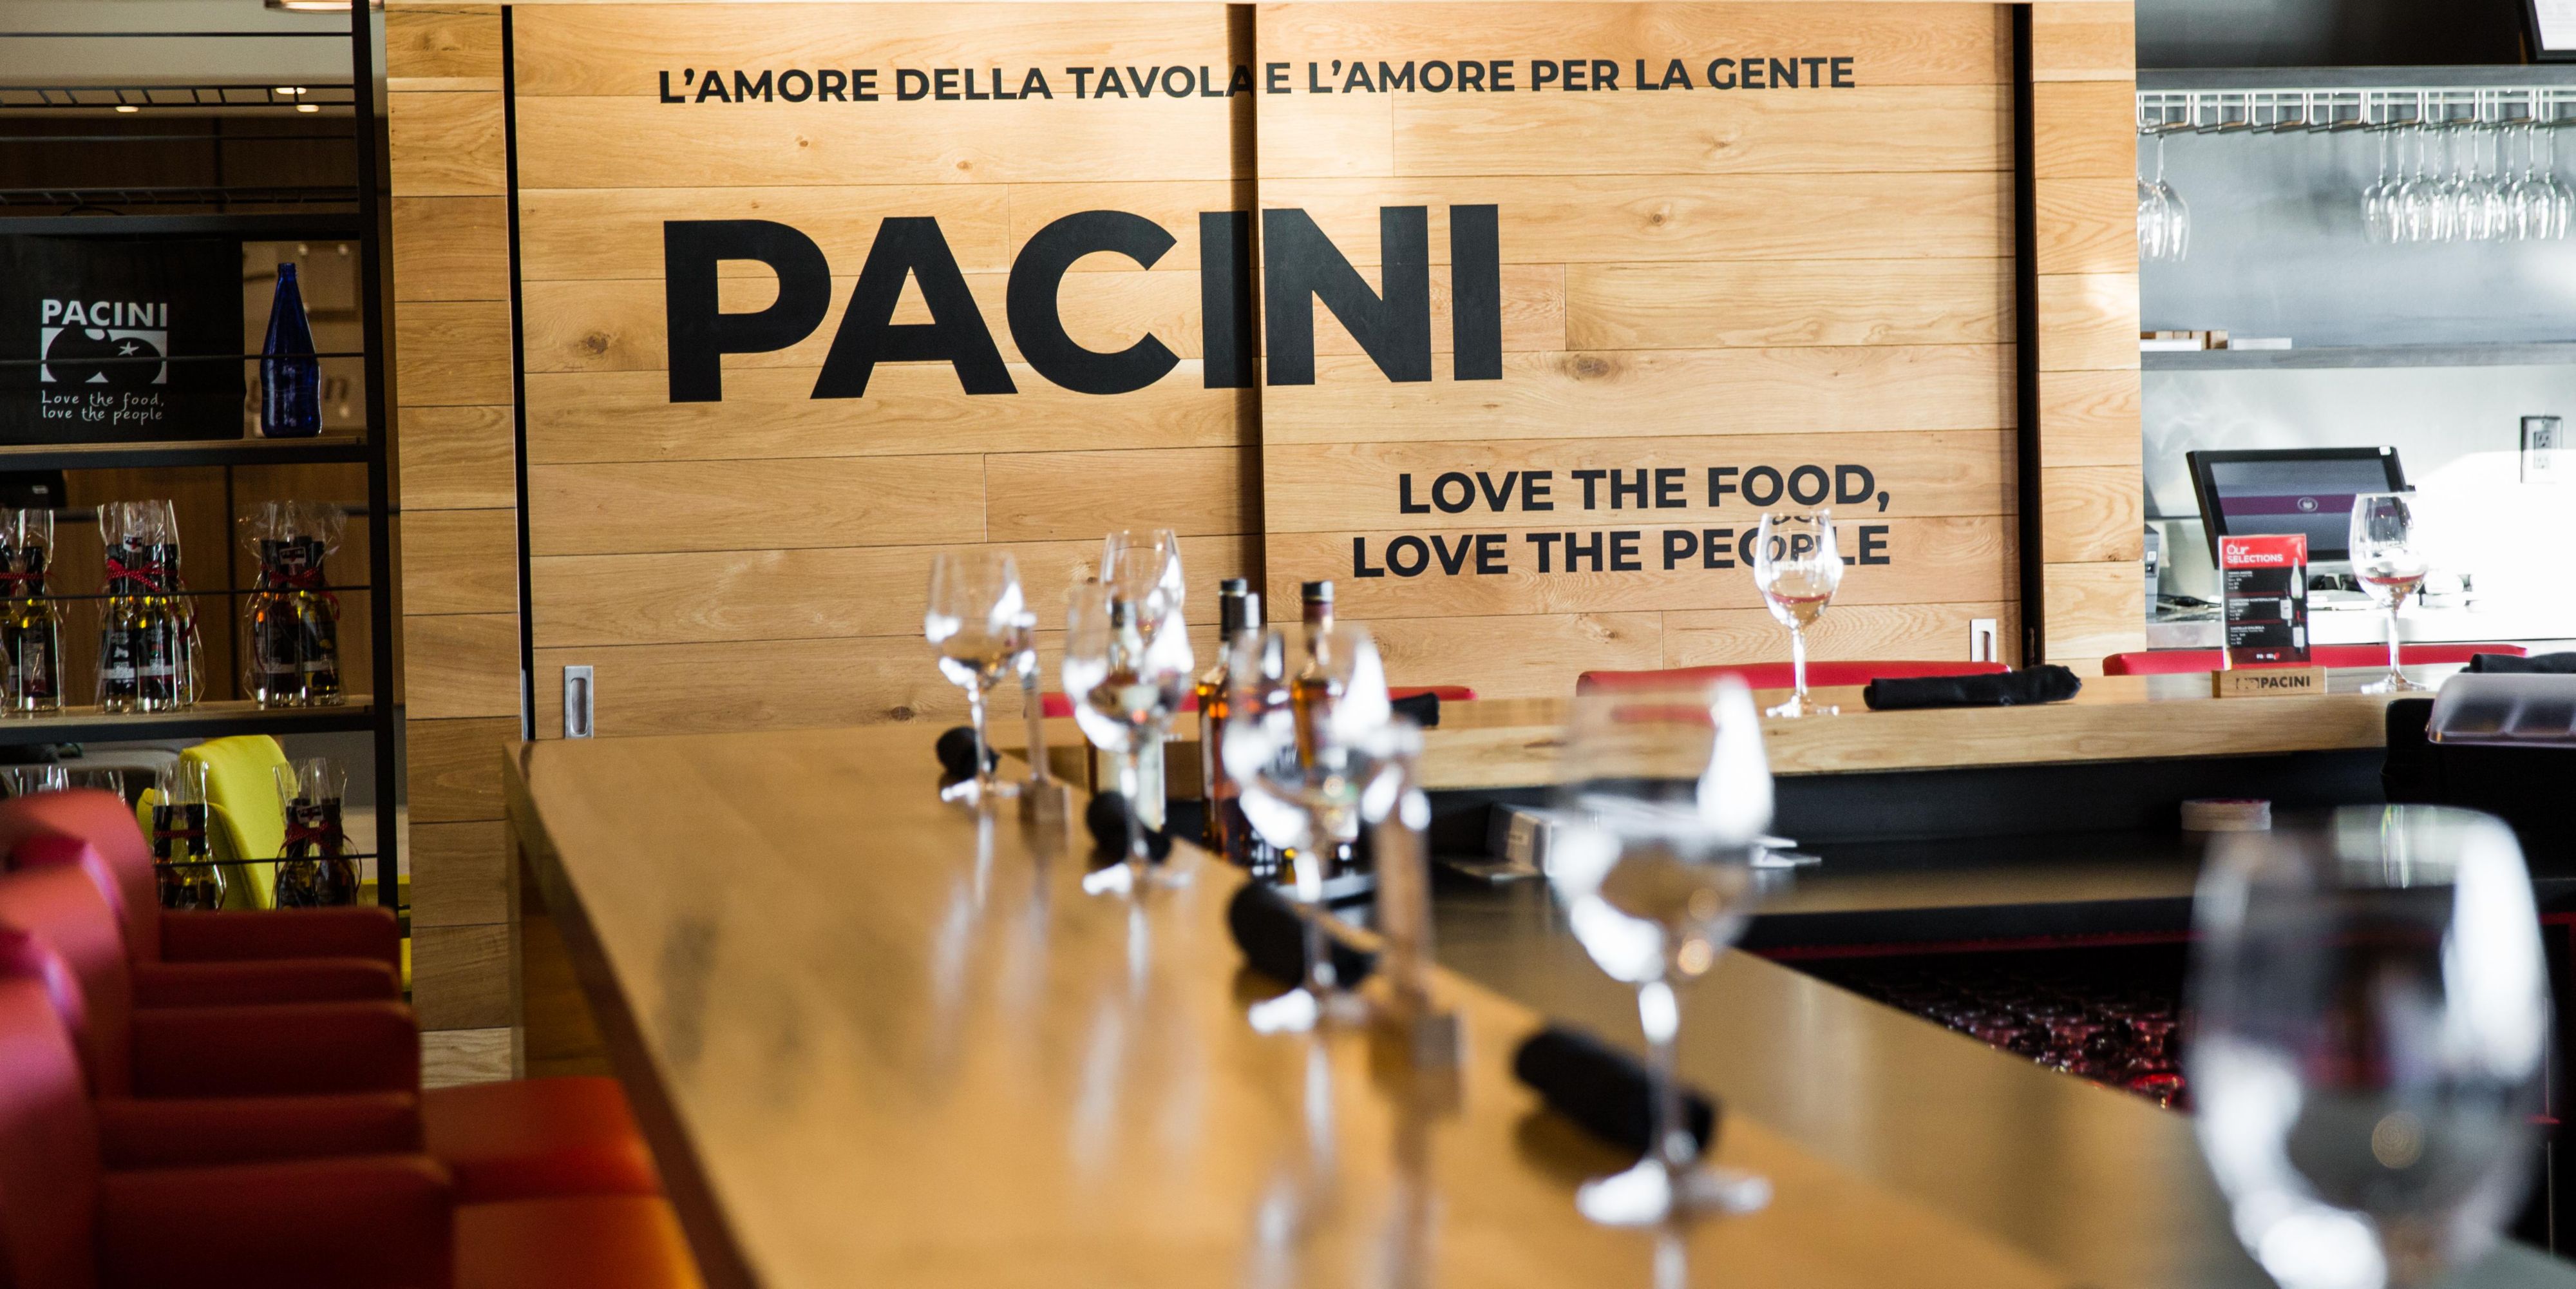 Our Pacini Lounge is a great place to relax after a long day.